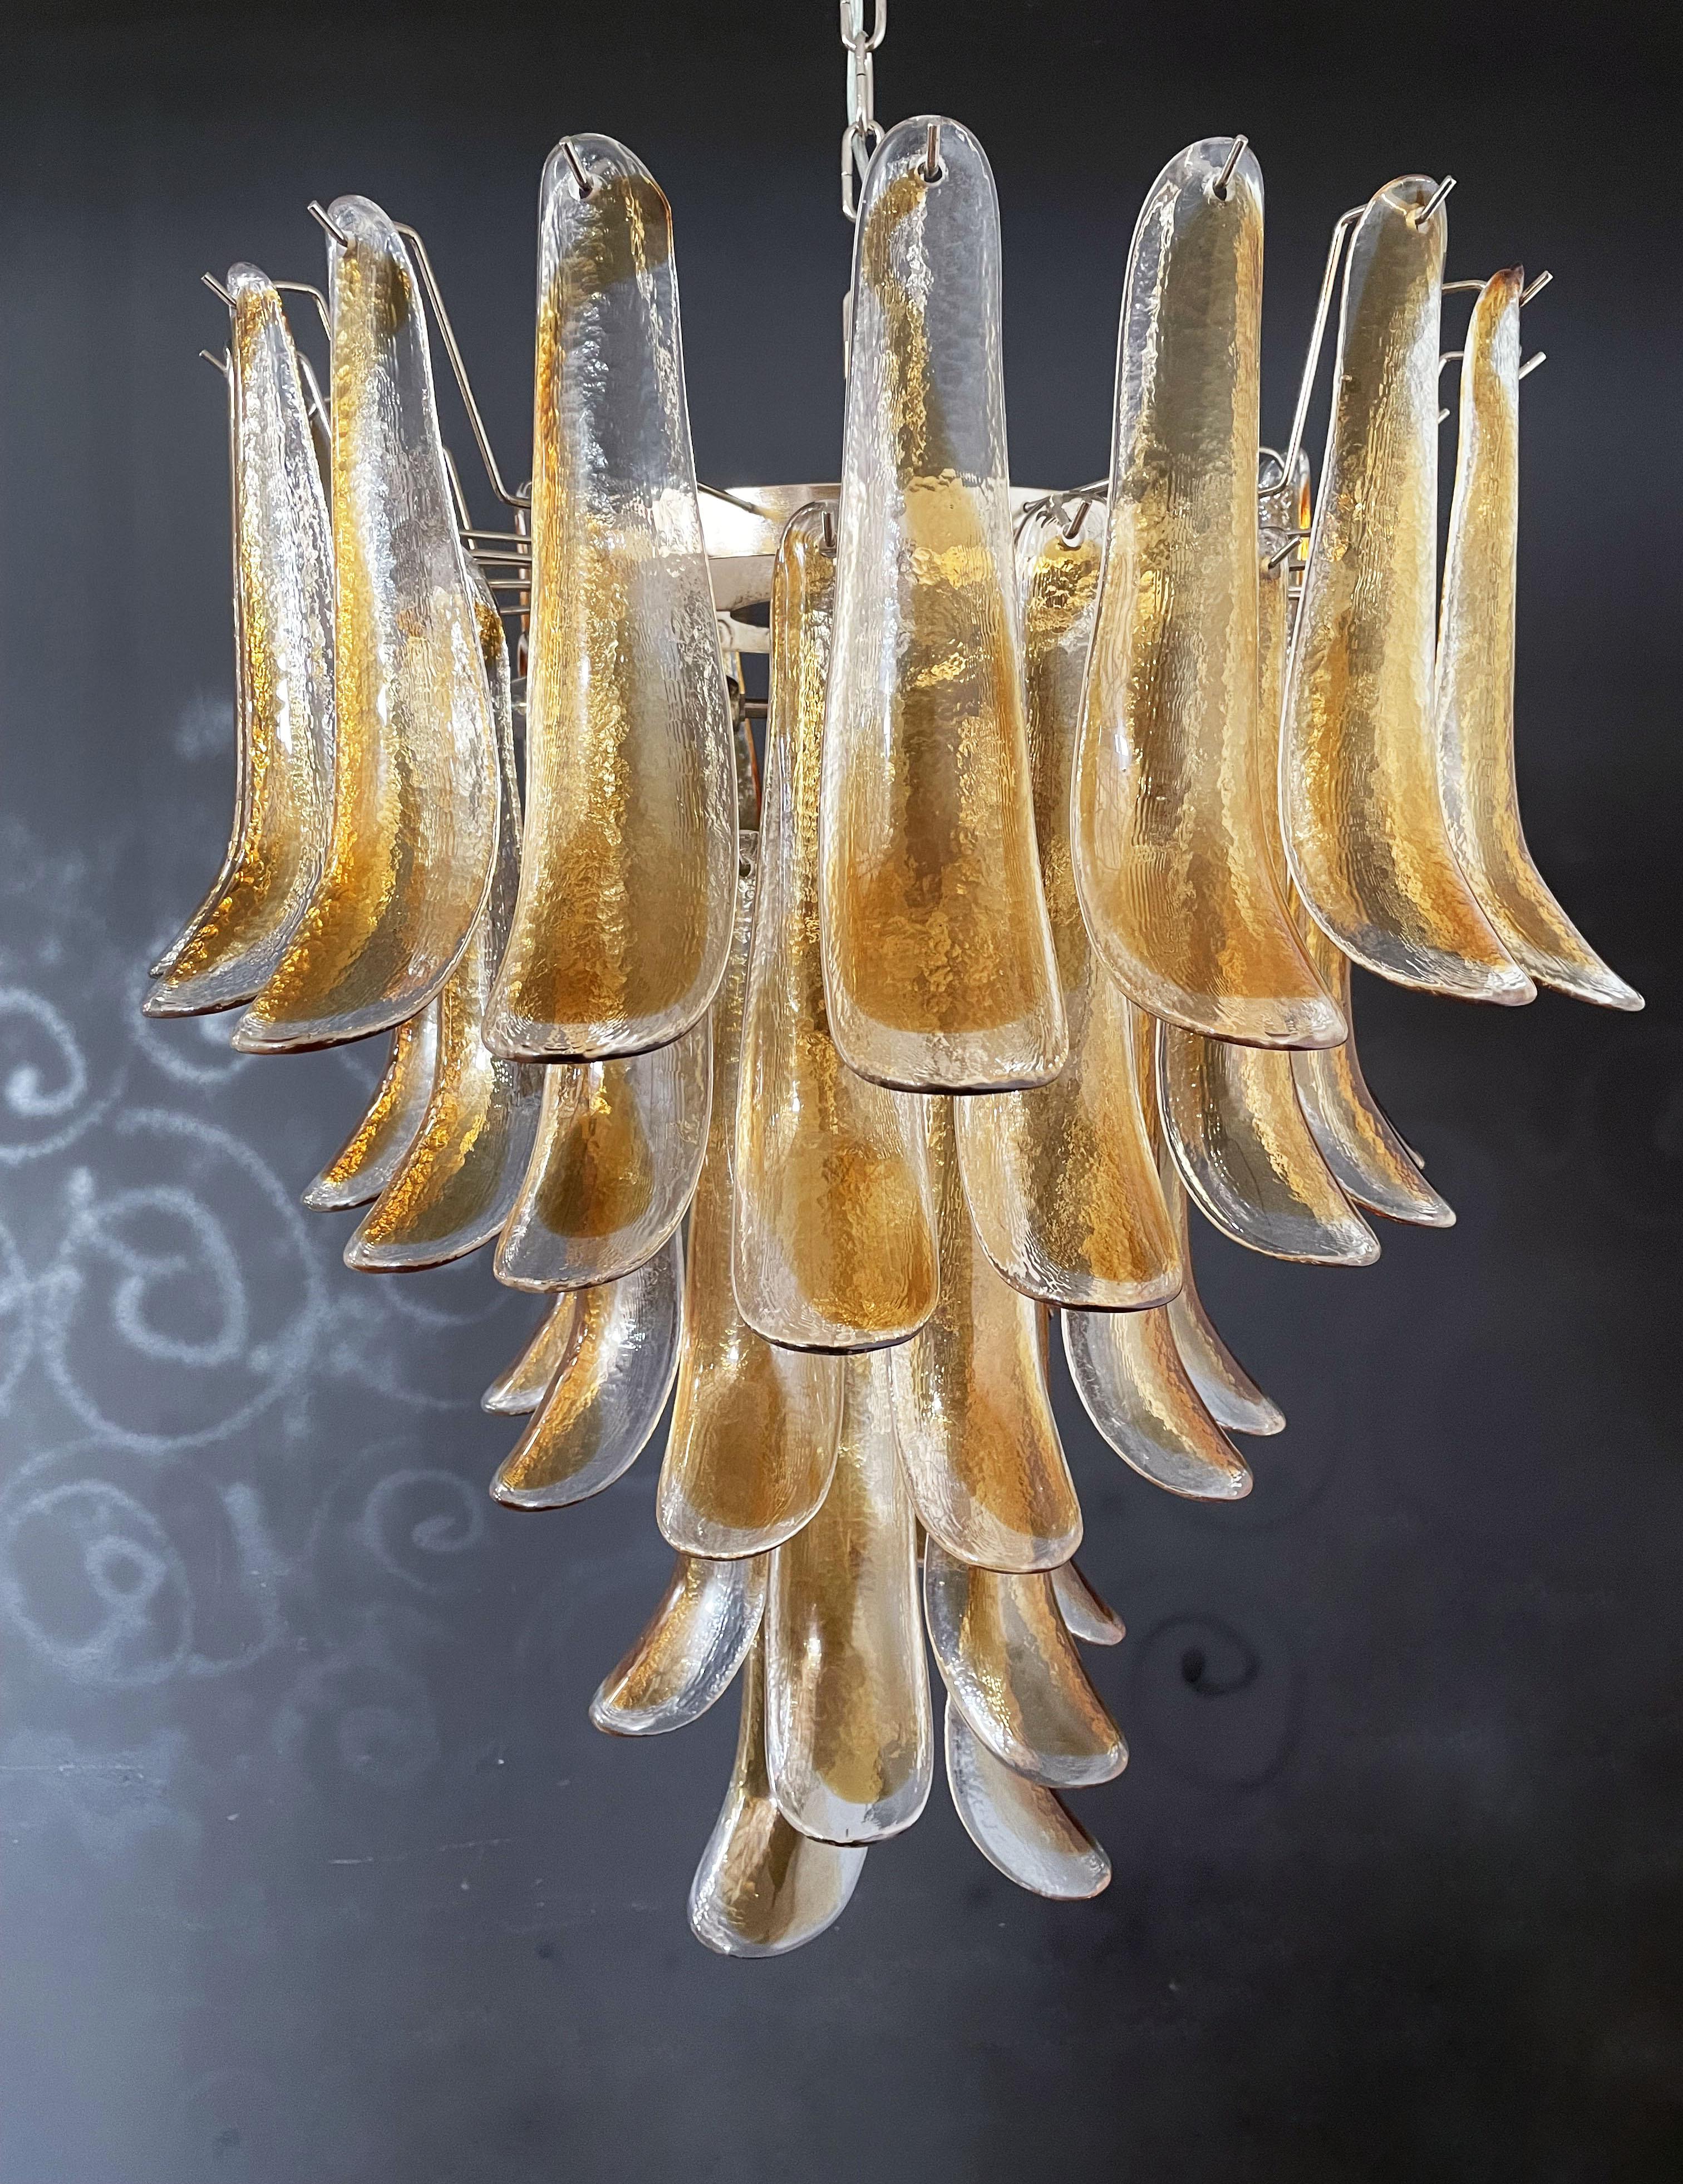 Huge Italian vintage Murano chandelier made by 52 glass petals transparent with an amber spot inside, nickel metal structure. The glasses are very high quality, the photos do not do the beauty, luster of these glasses. in a chrome frame.
Period: